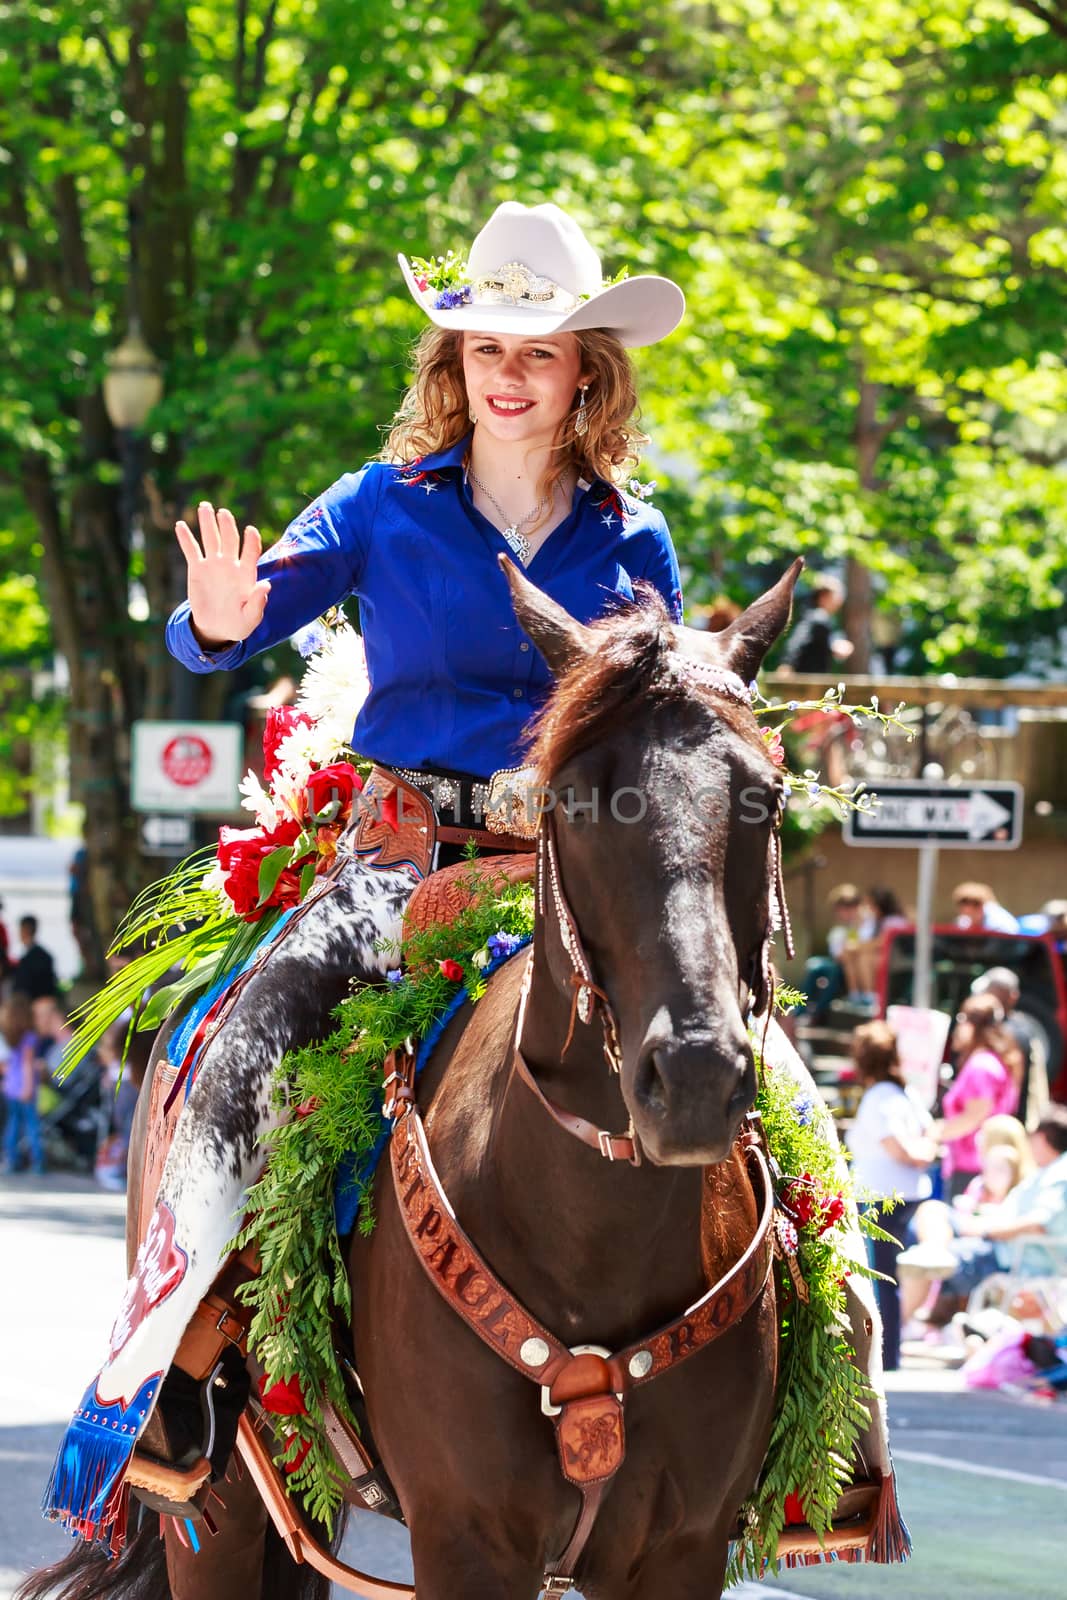 Portland, Oregon, USA - JUNE 7, 2014: St. Paul Rodeo Court in Grand floral parade through Portland downtown.